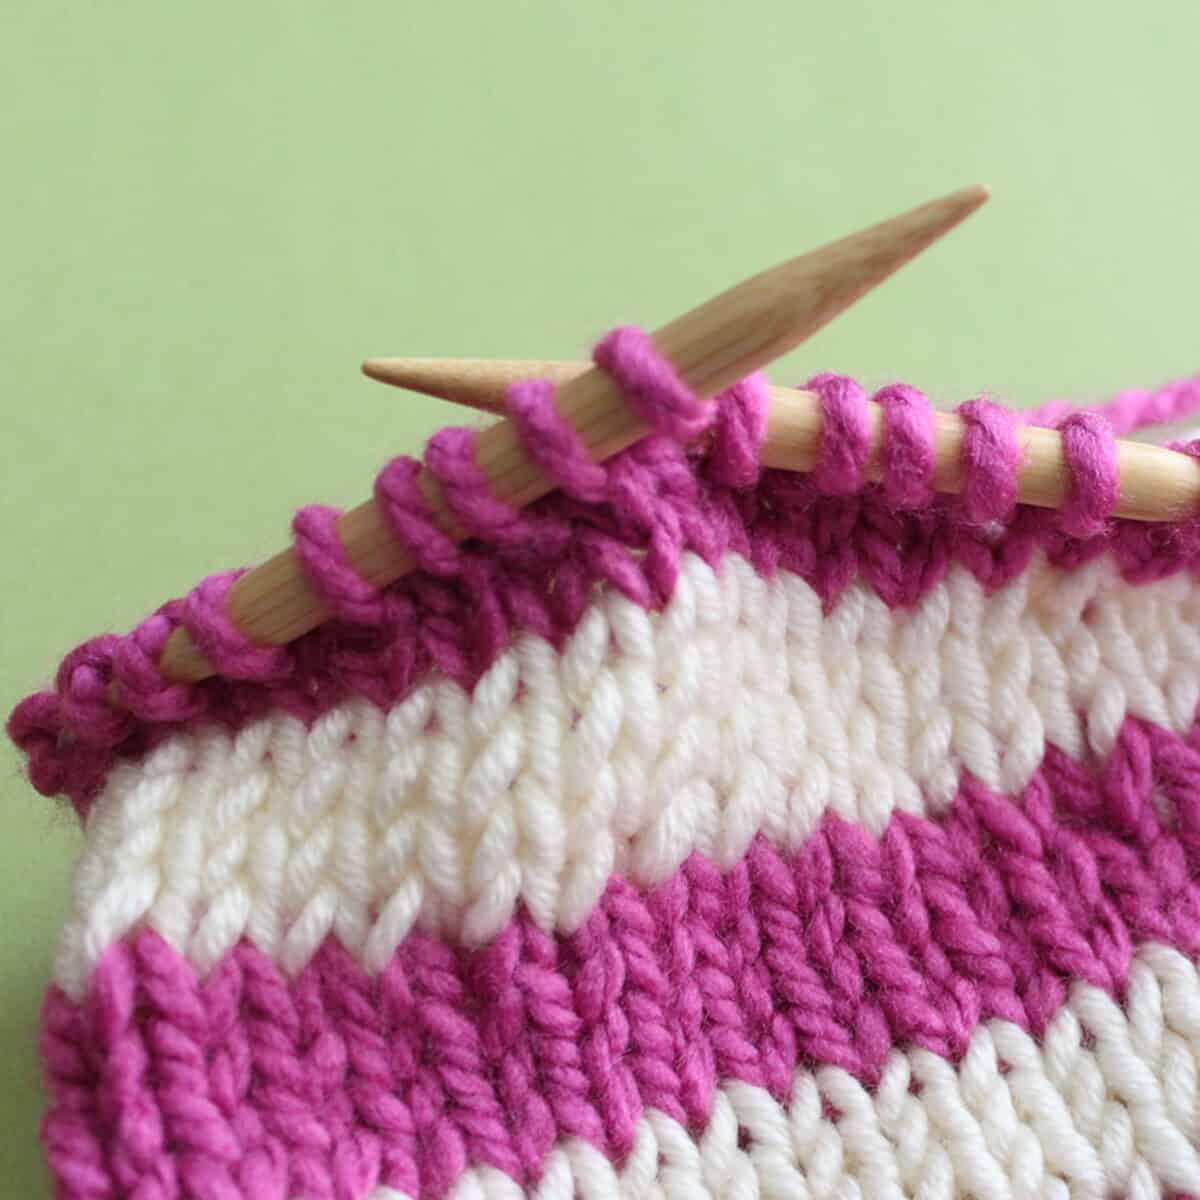 Knitted sample in horizontal stripes in pink and white yarn color on circular knitting needles.